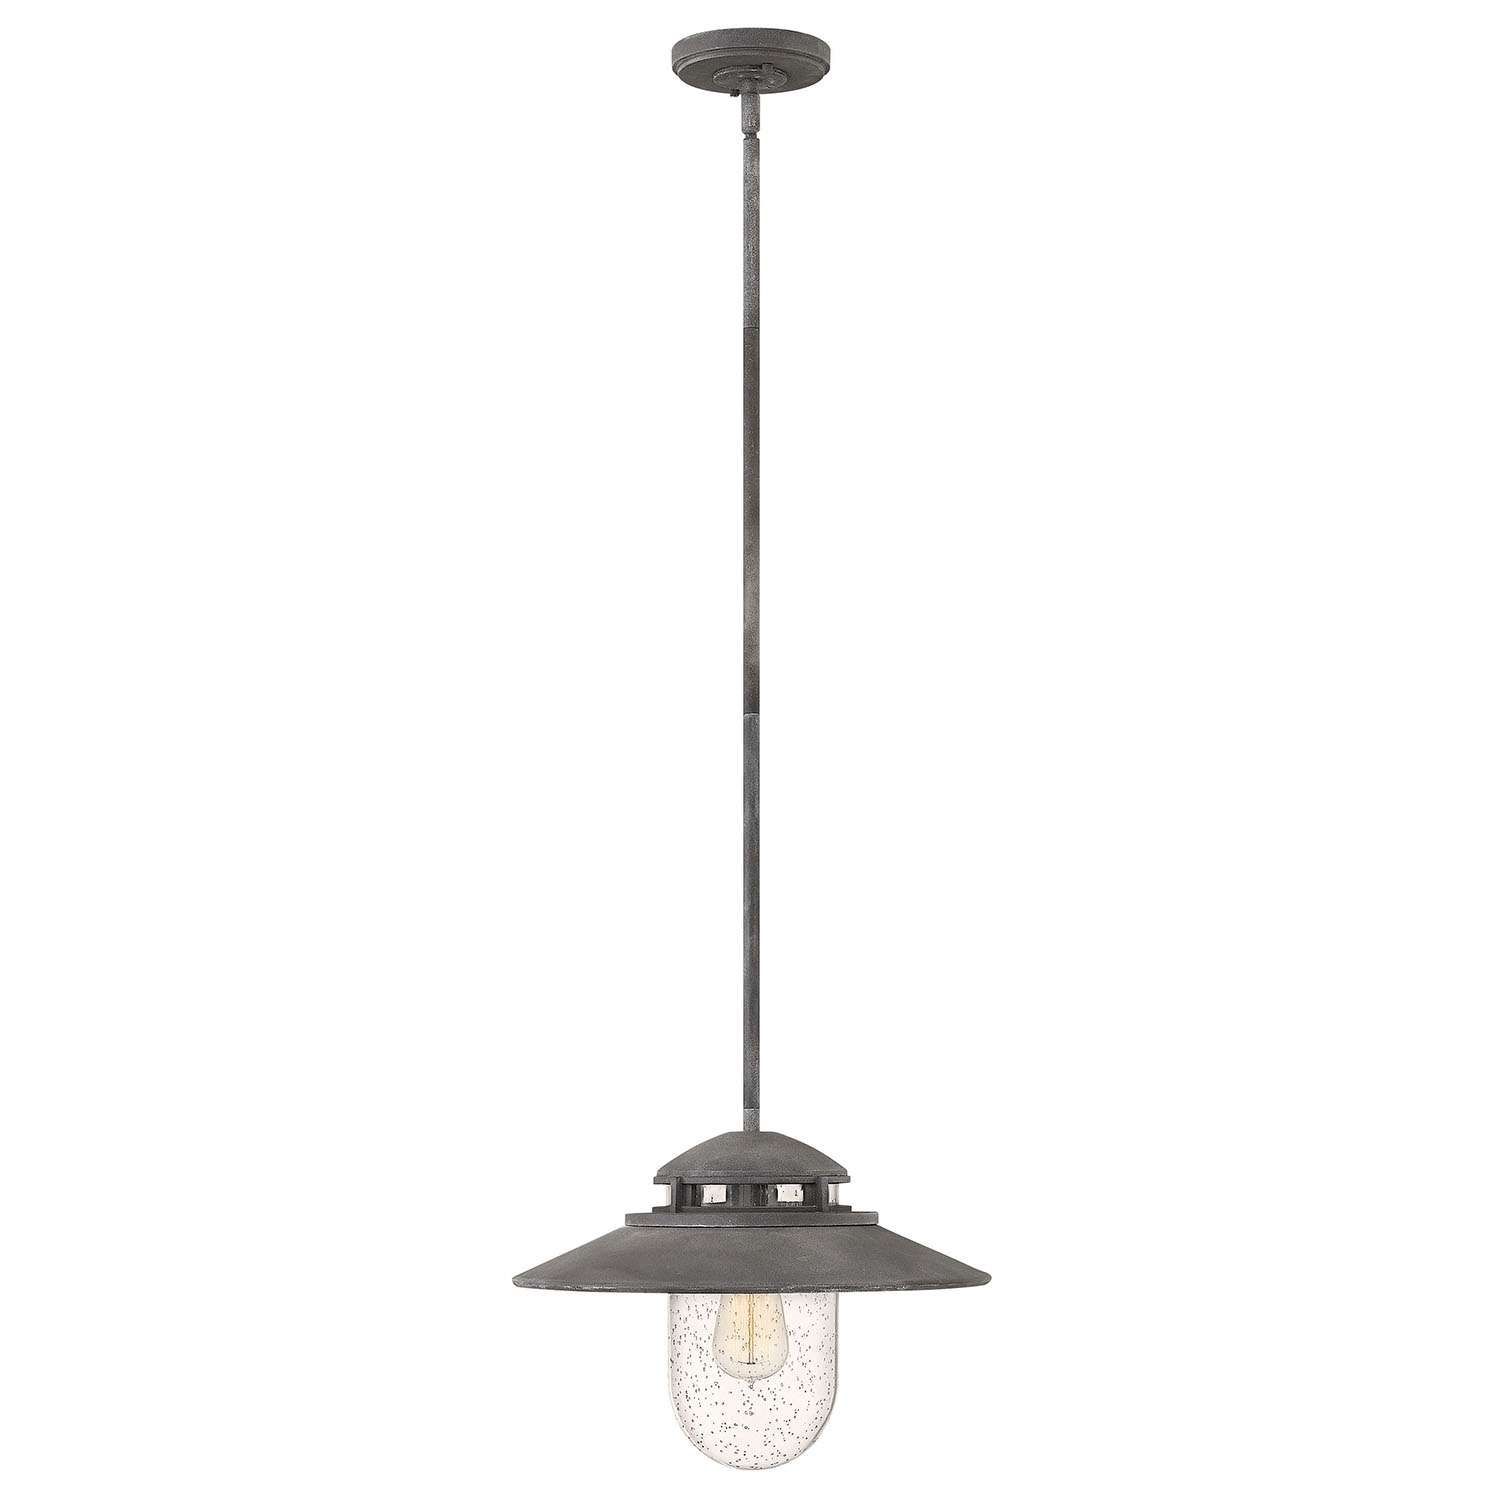 Outdoor Pendant Light Crystal Pendant Light‚ Brushed Nickel Mini With Regard To Commercial Outdoor Hanging Lights (View 15 of 15)